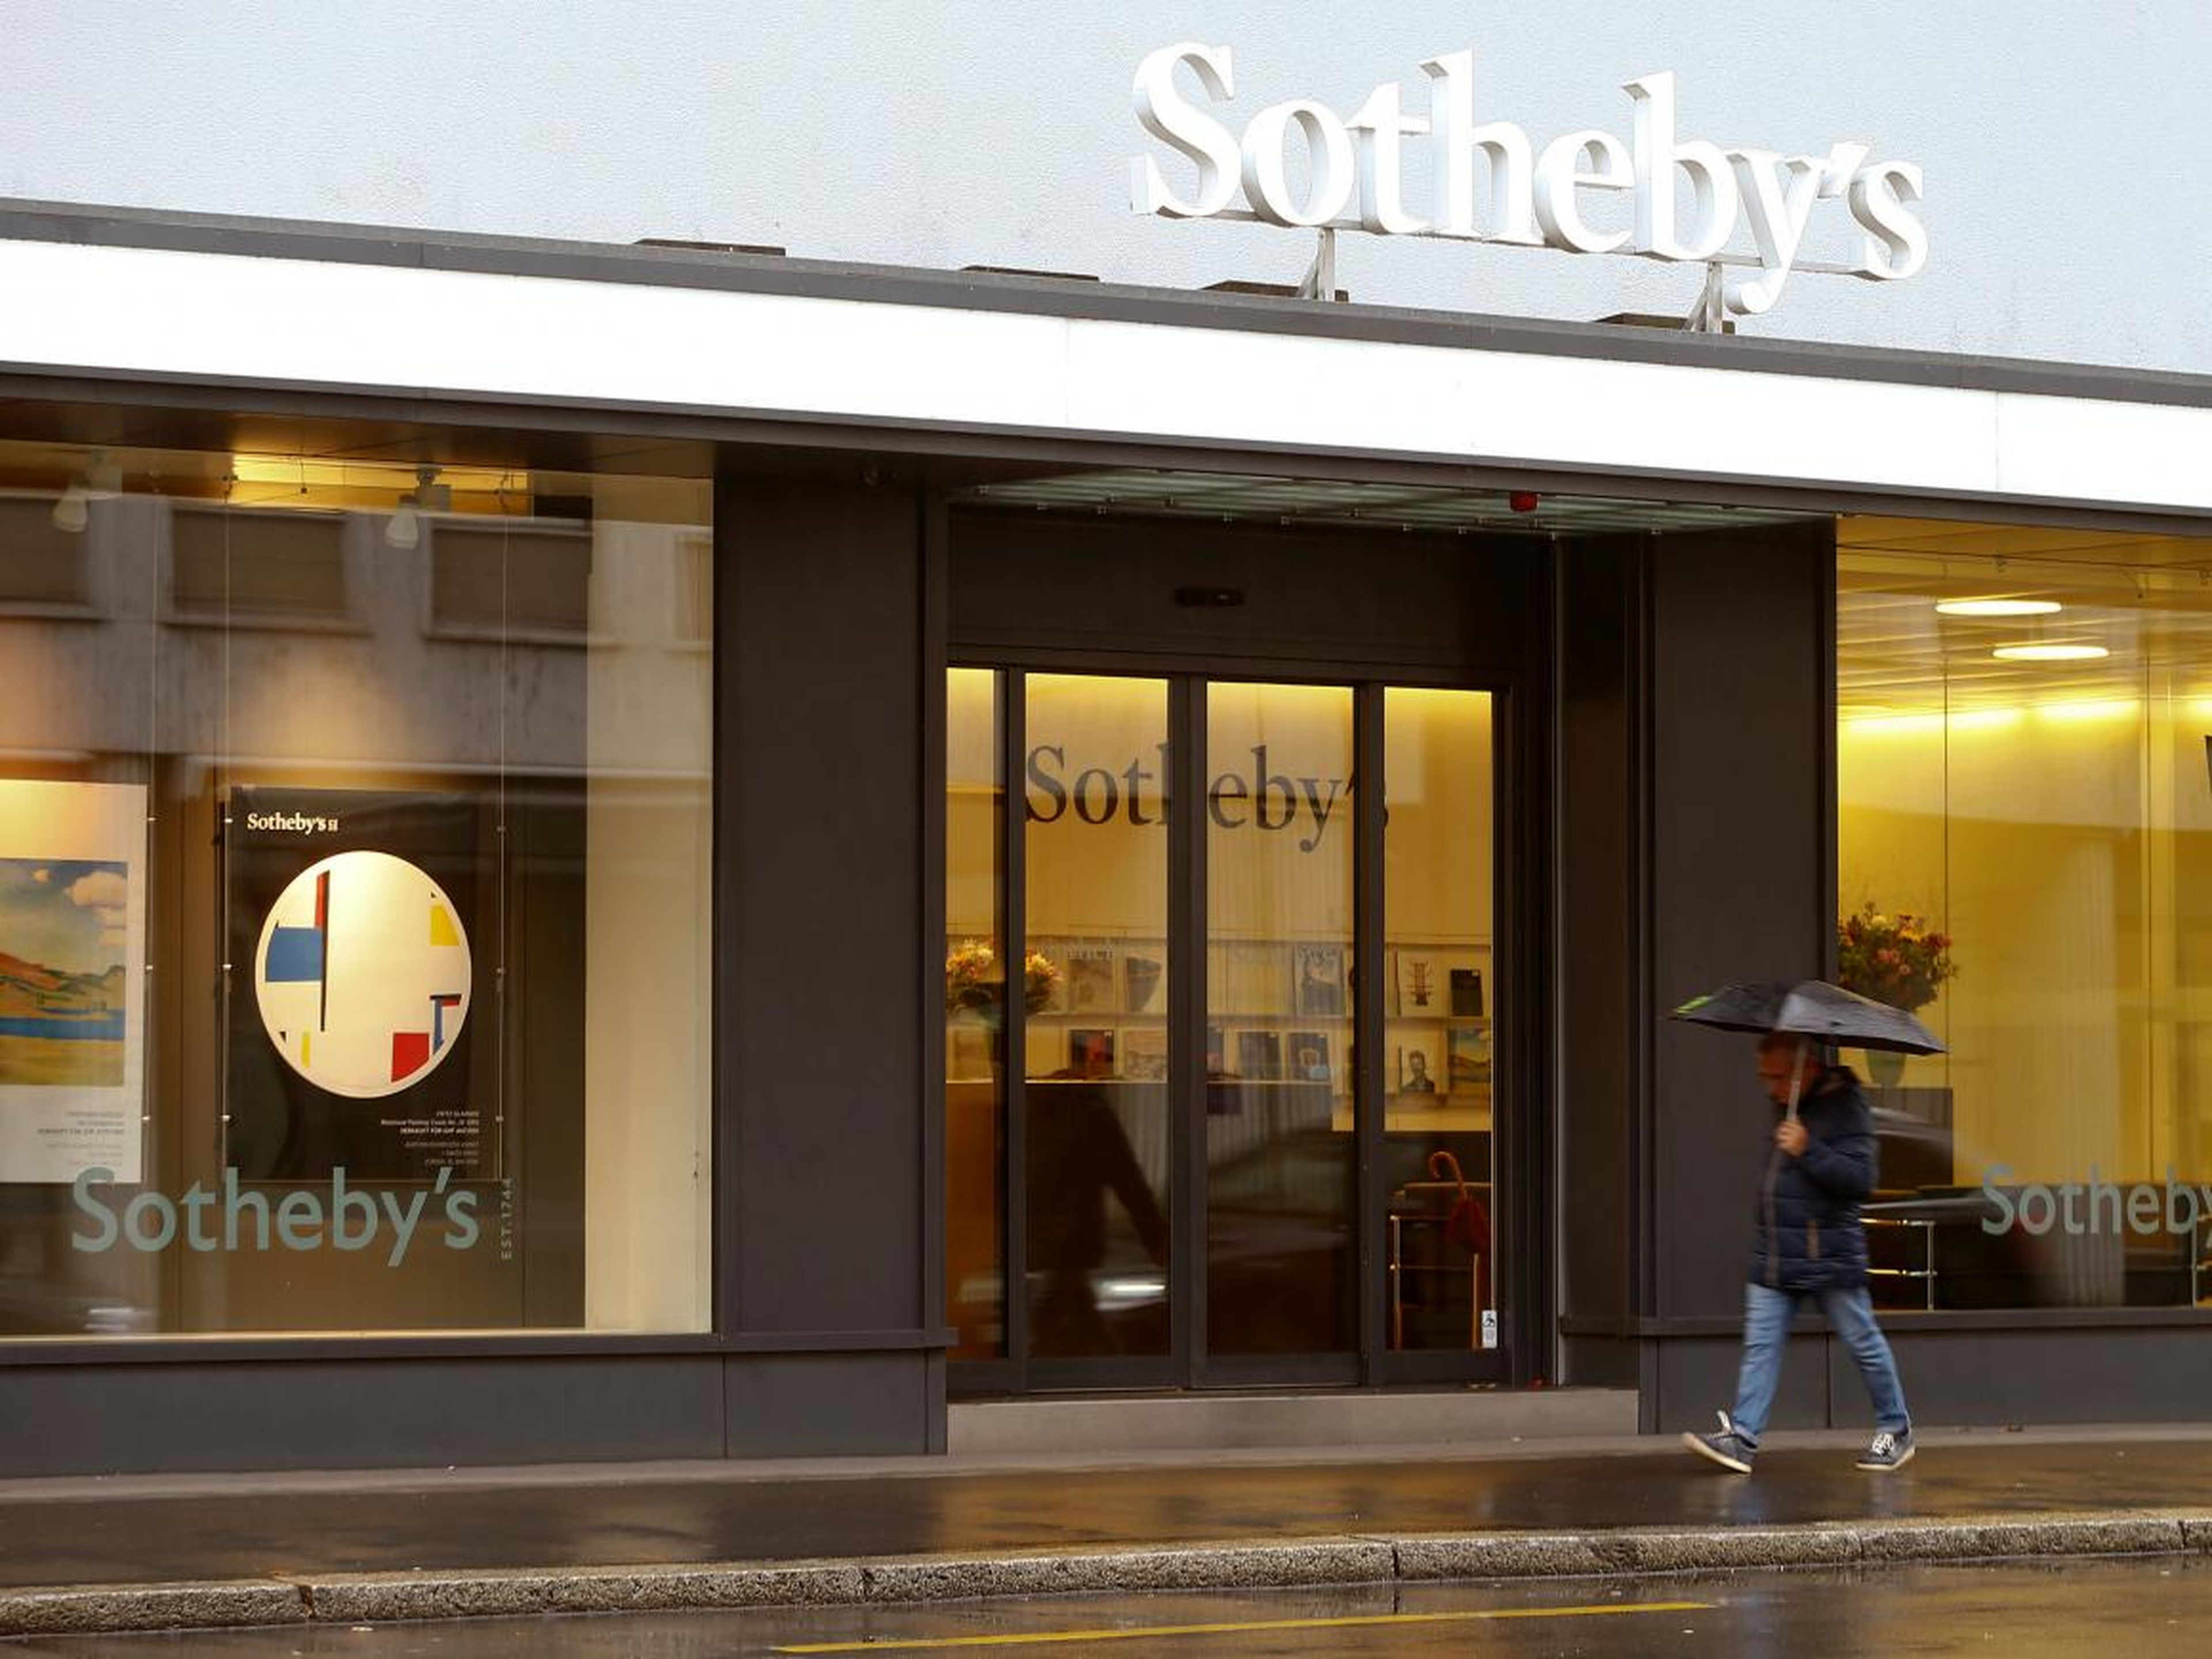 Amazon also had a deal with Sotheby's, where the two companies jointly ran a high-end online auction site.